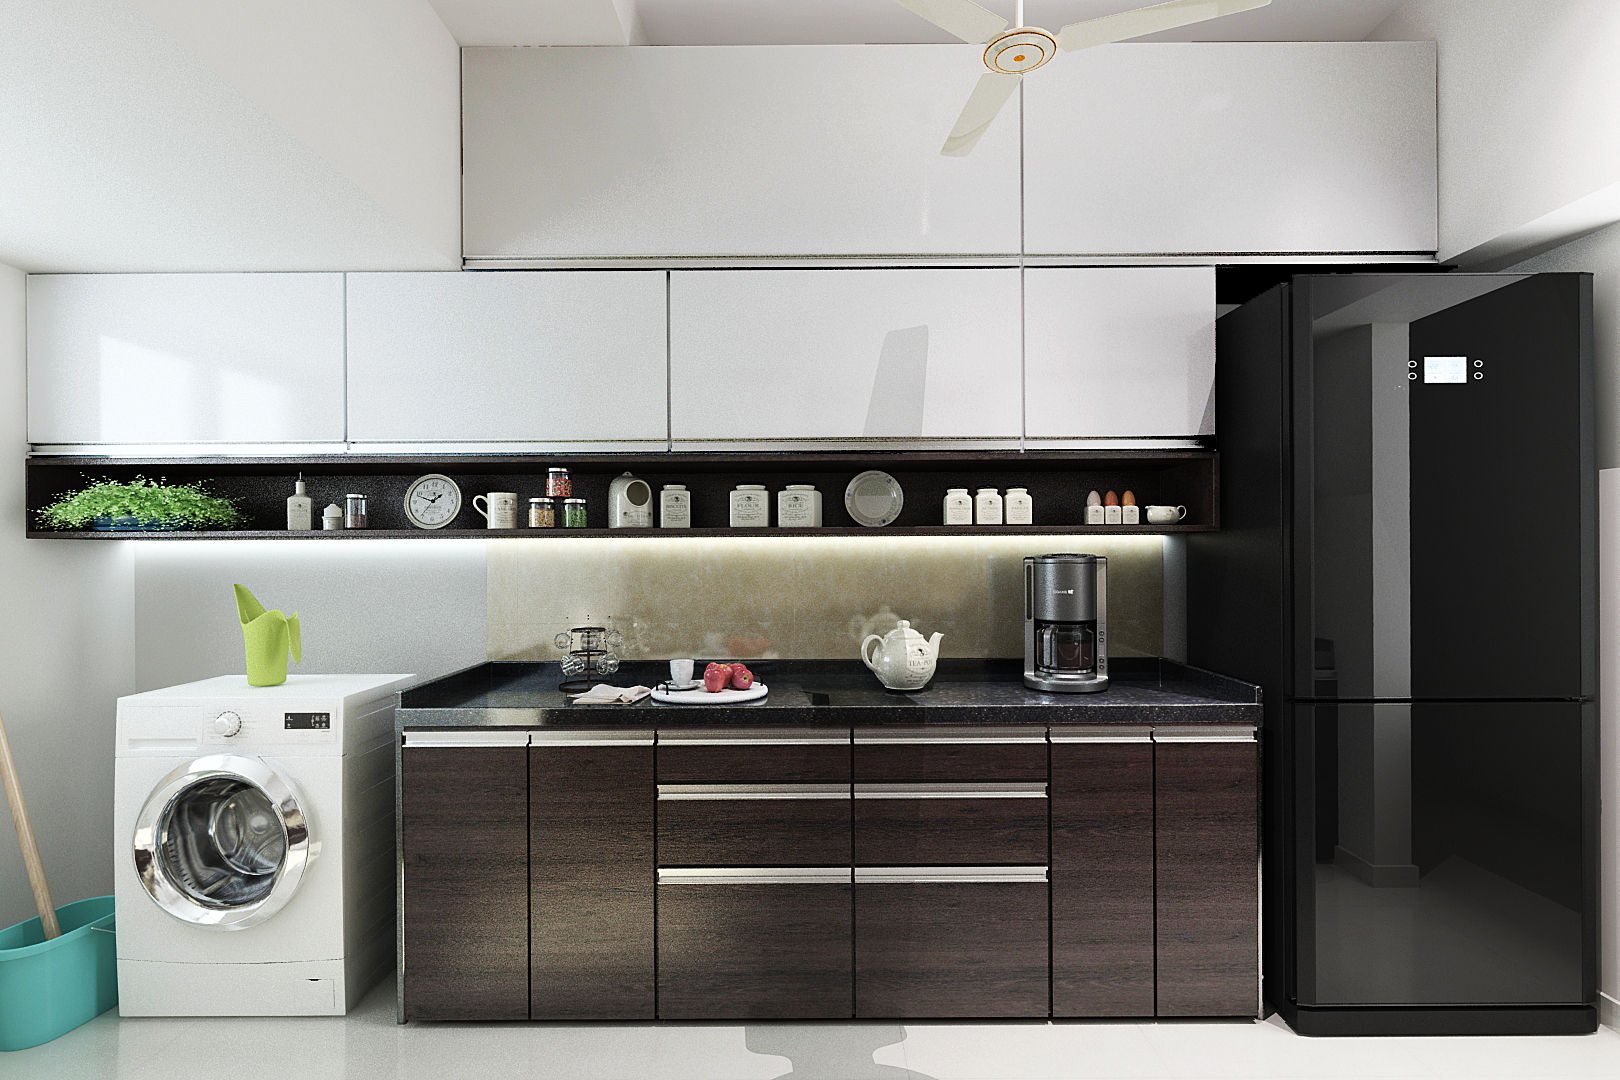 Modular kitchen The inside stories - by Minal Built-in kitchens Glass